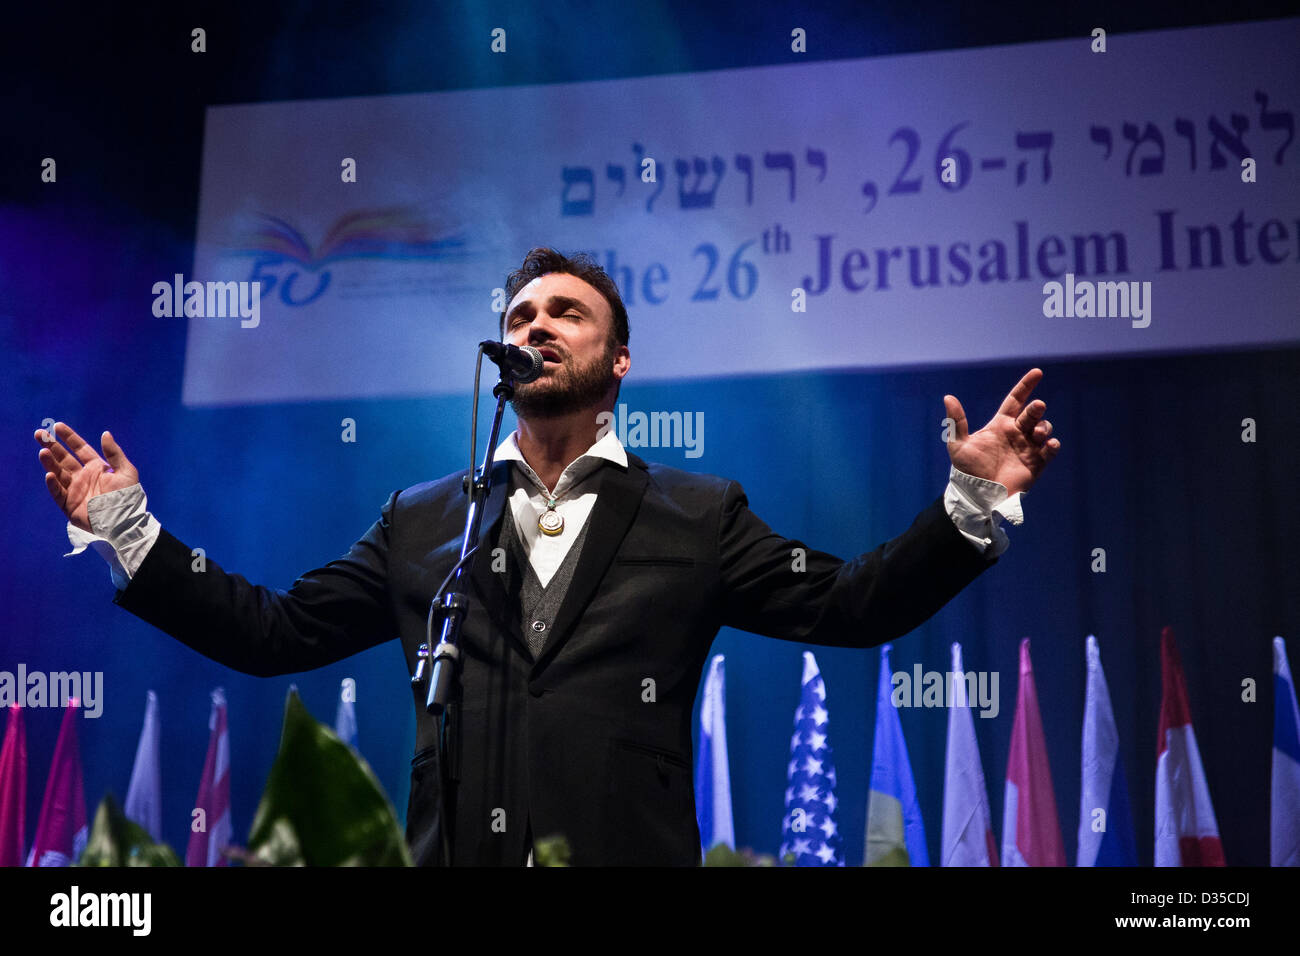 David D'Or, Israeli singer, composer, and songwriter, a countertenor with a vocal range of more than four octaves, performs at the opening ceremony of the Jerusalem International Book Fair. Jerusalem, Israel. 10-Feb-2013.  First held in 1963, the Jerusalem International Book Fair is a unique biennial event, business fair and a prestigious and important cultural event. 600 publishers and authors from more than 30 countries display more than 100,000 books. Stock Photo